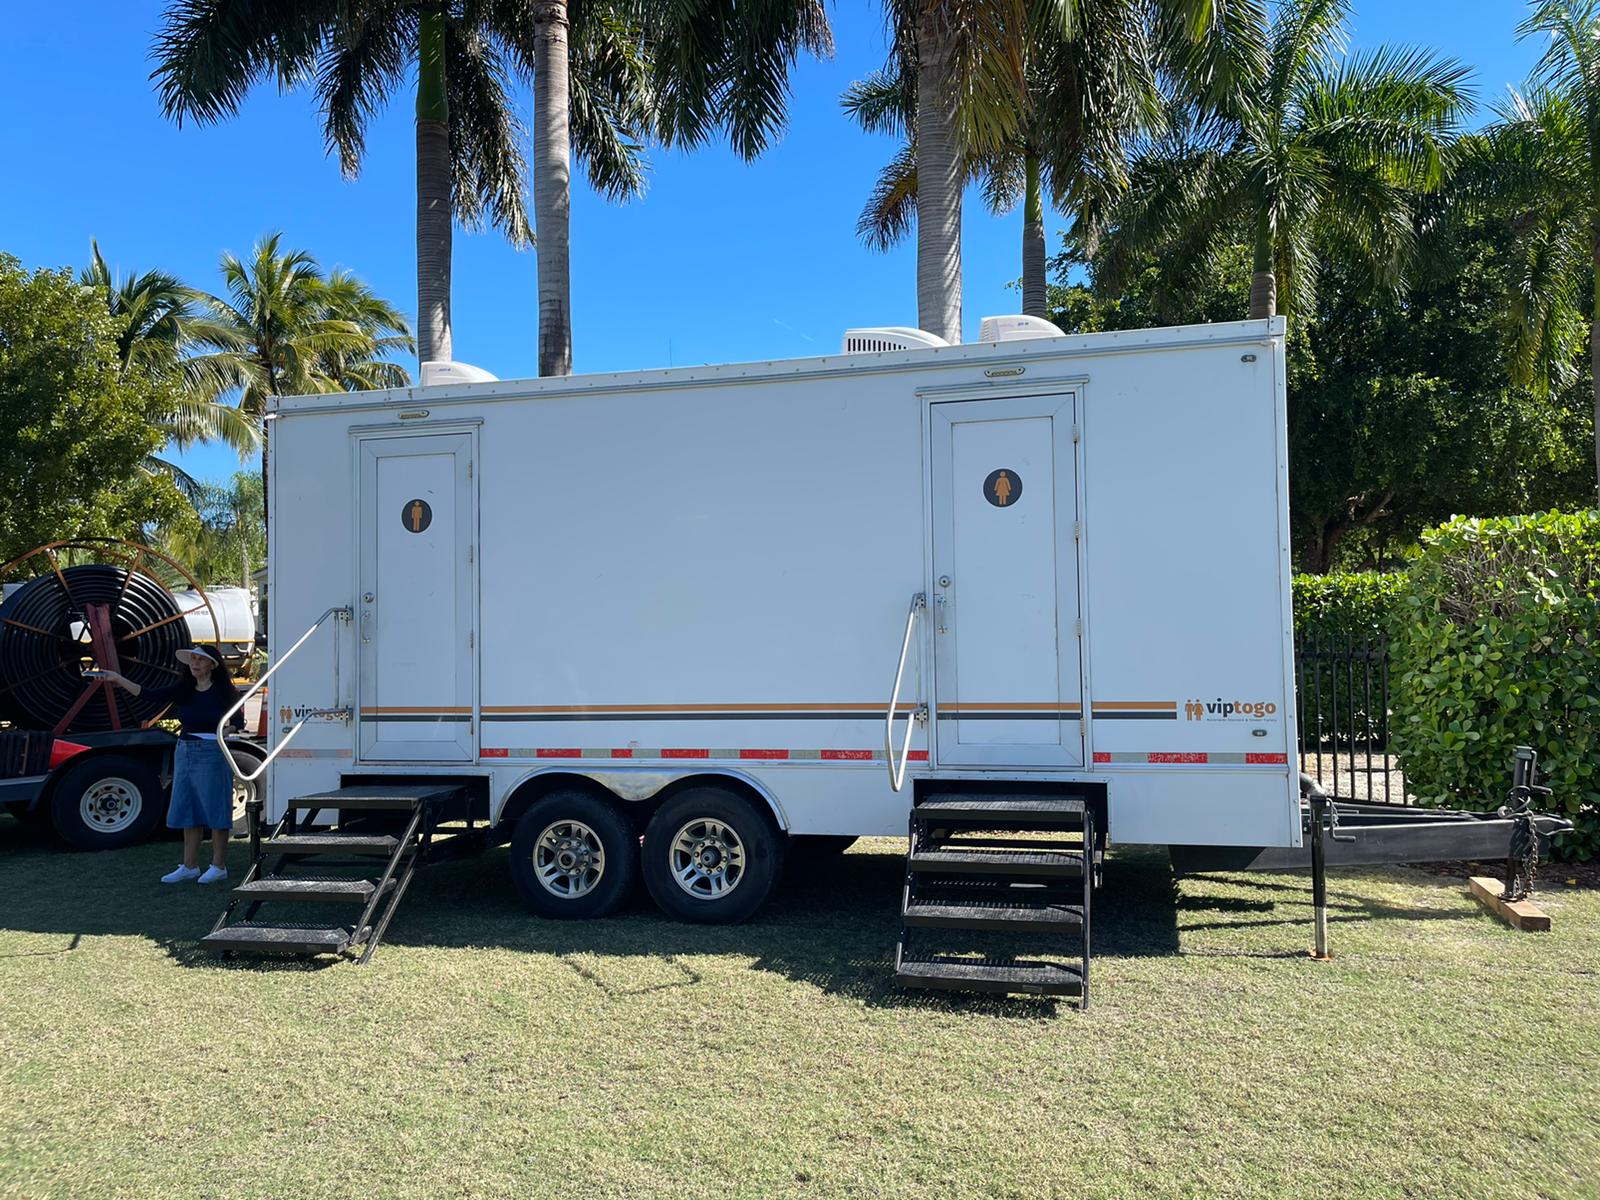 VIP To Go’s mobile restroom outdoors